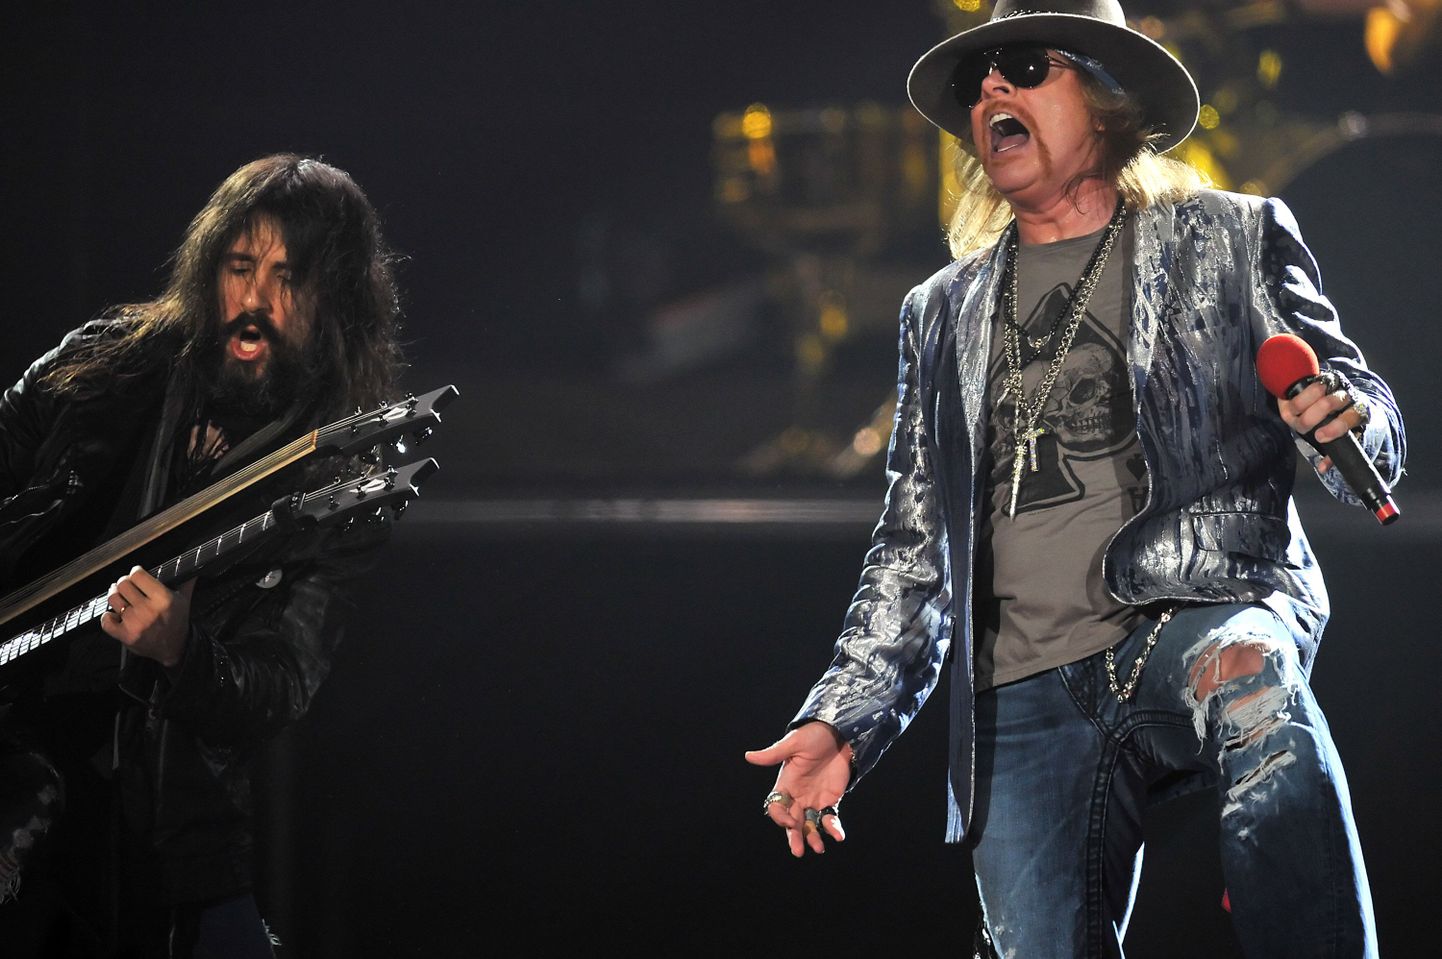 U.S. band Guns N' Roses guitarist Ron Thal and singer Axl Rose perform on their first night at London's O2 Arena, on Wednesday, Oct. 13 2010. (AP Photo/Mark Allan) / SCANPIX Code: 436